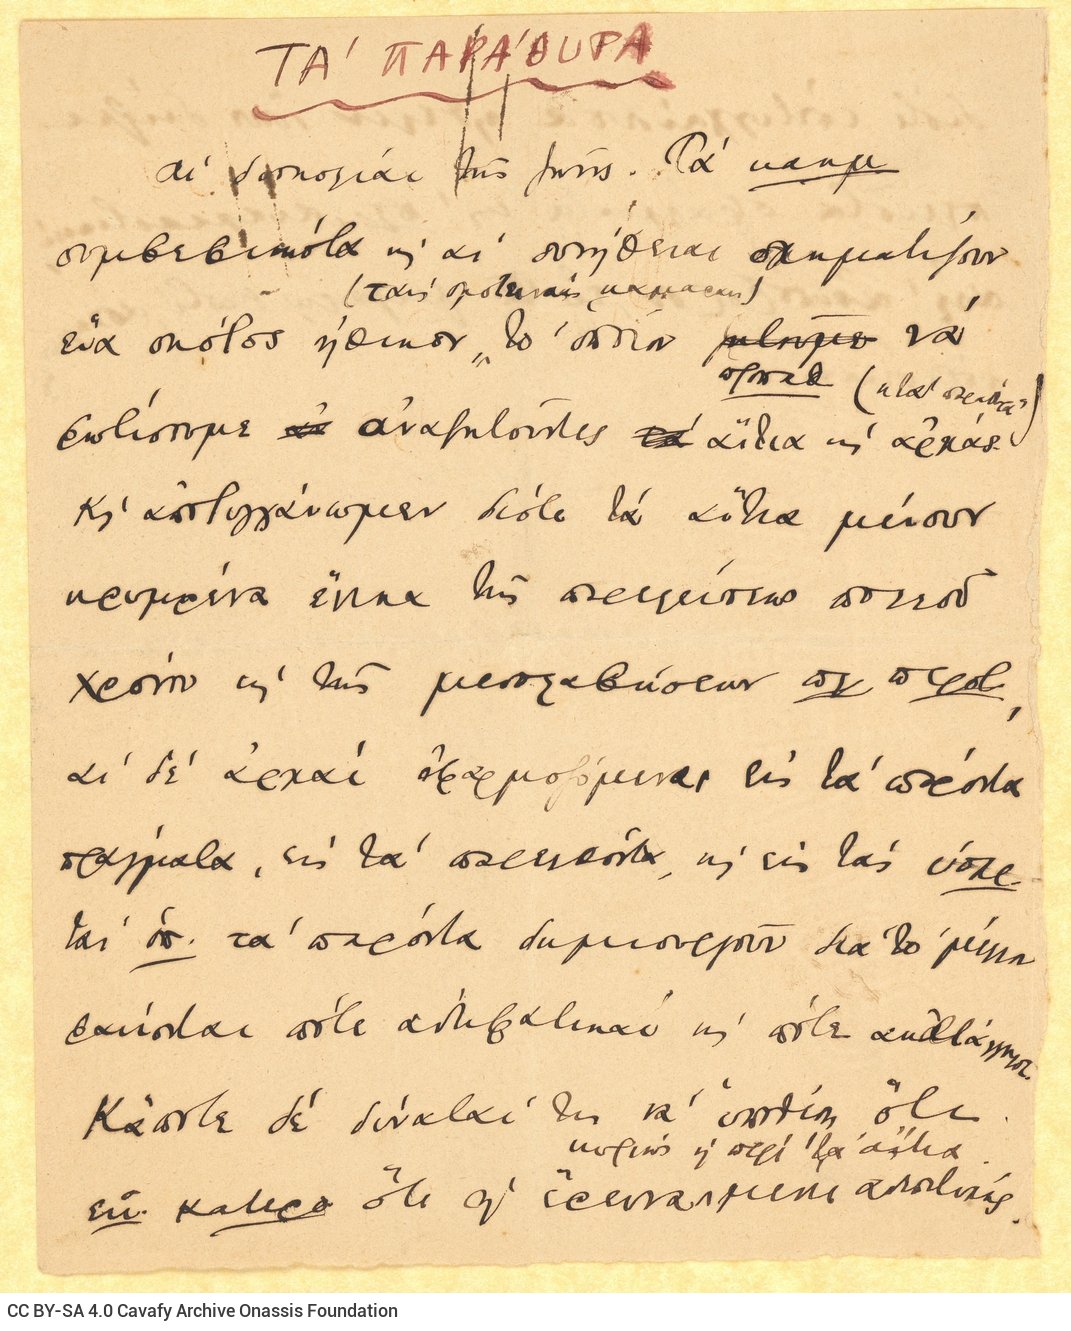 Handwritten notes on the poem "The Windows" in ink, on both sides of a sheet of paper. The title is written and underlined